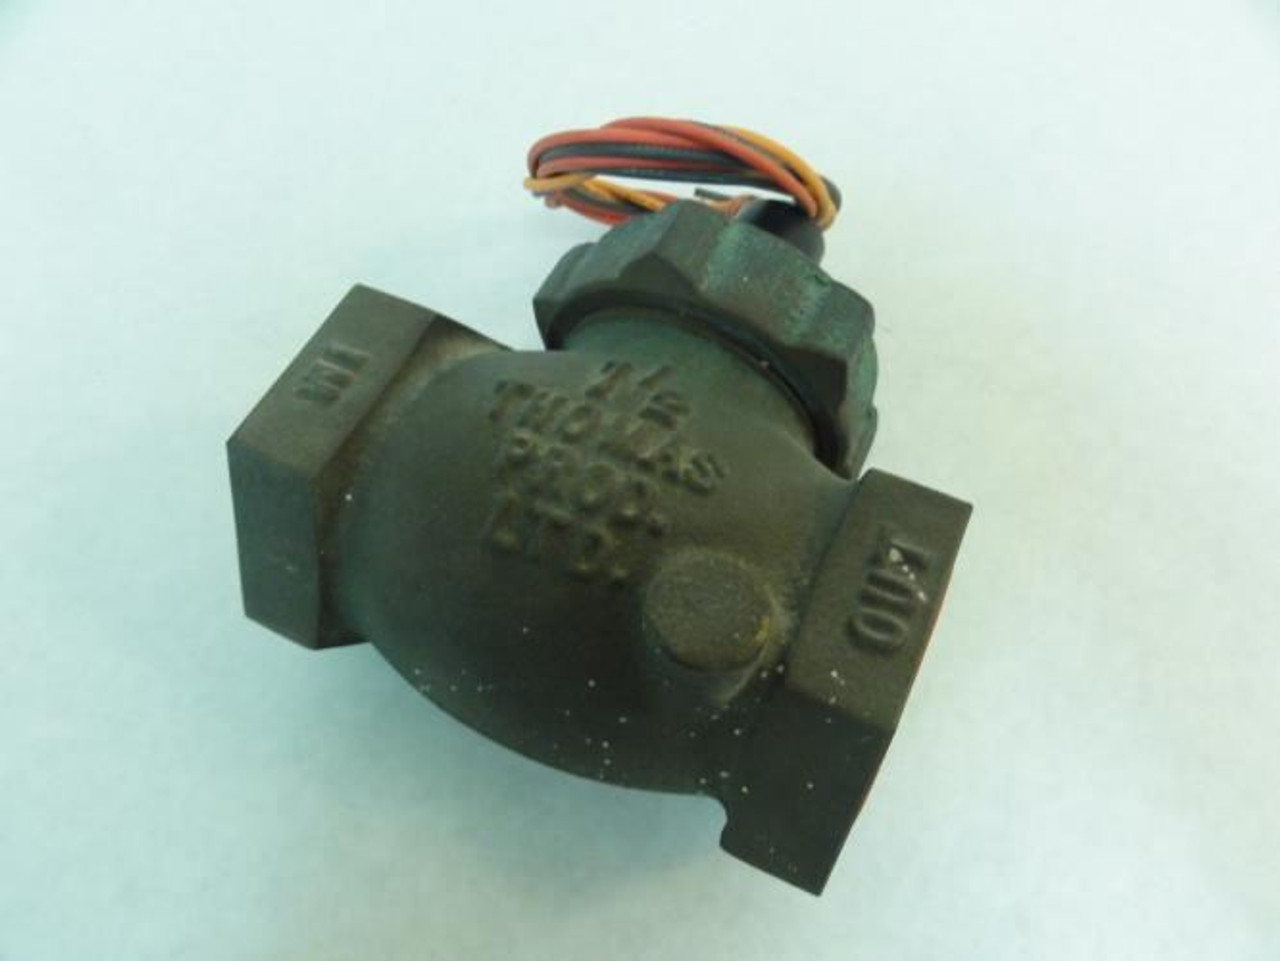 Thomas Products 18184; Liquid Flow Switch; 1-1/2" FNPT; 3 GPM